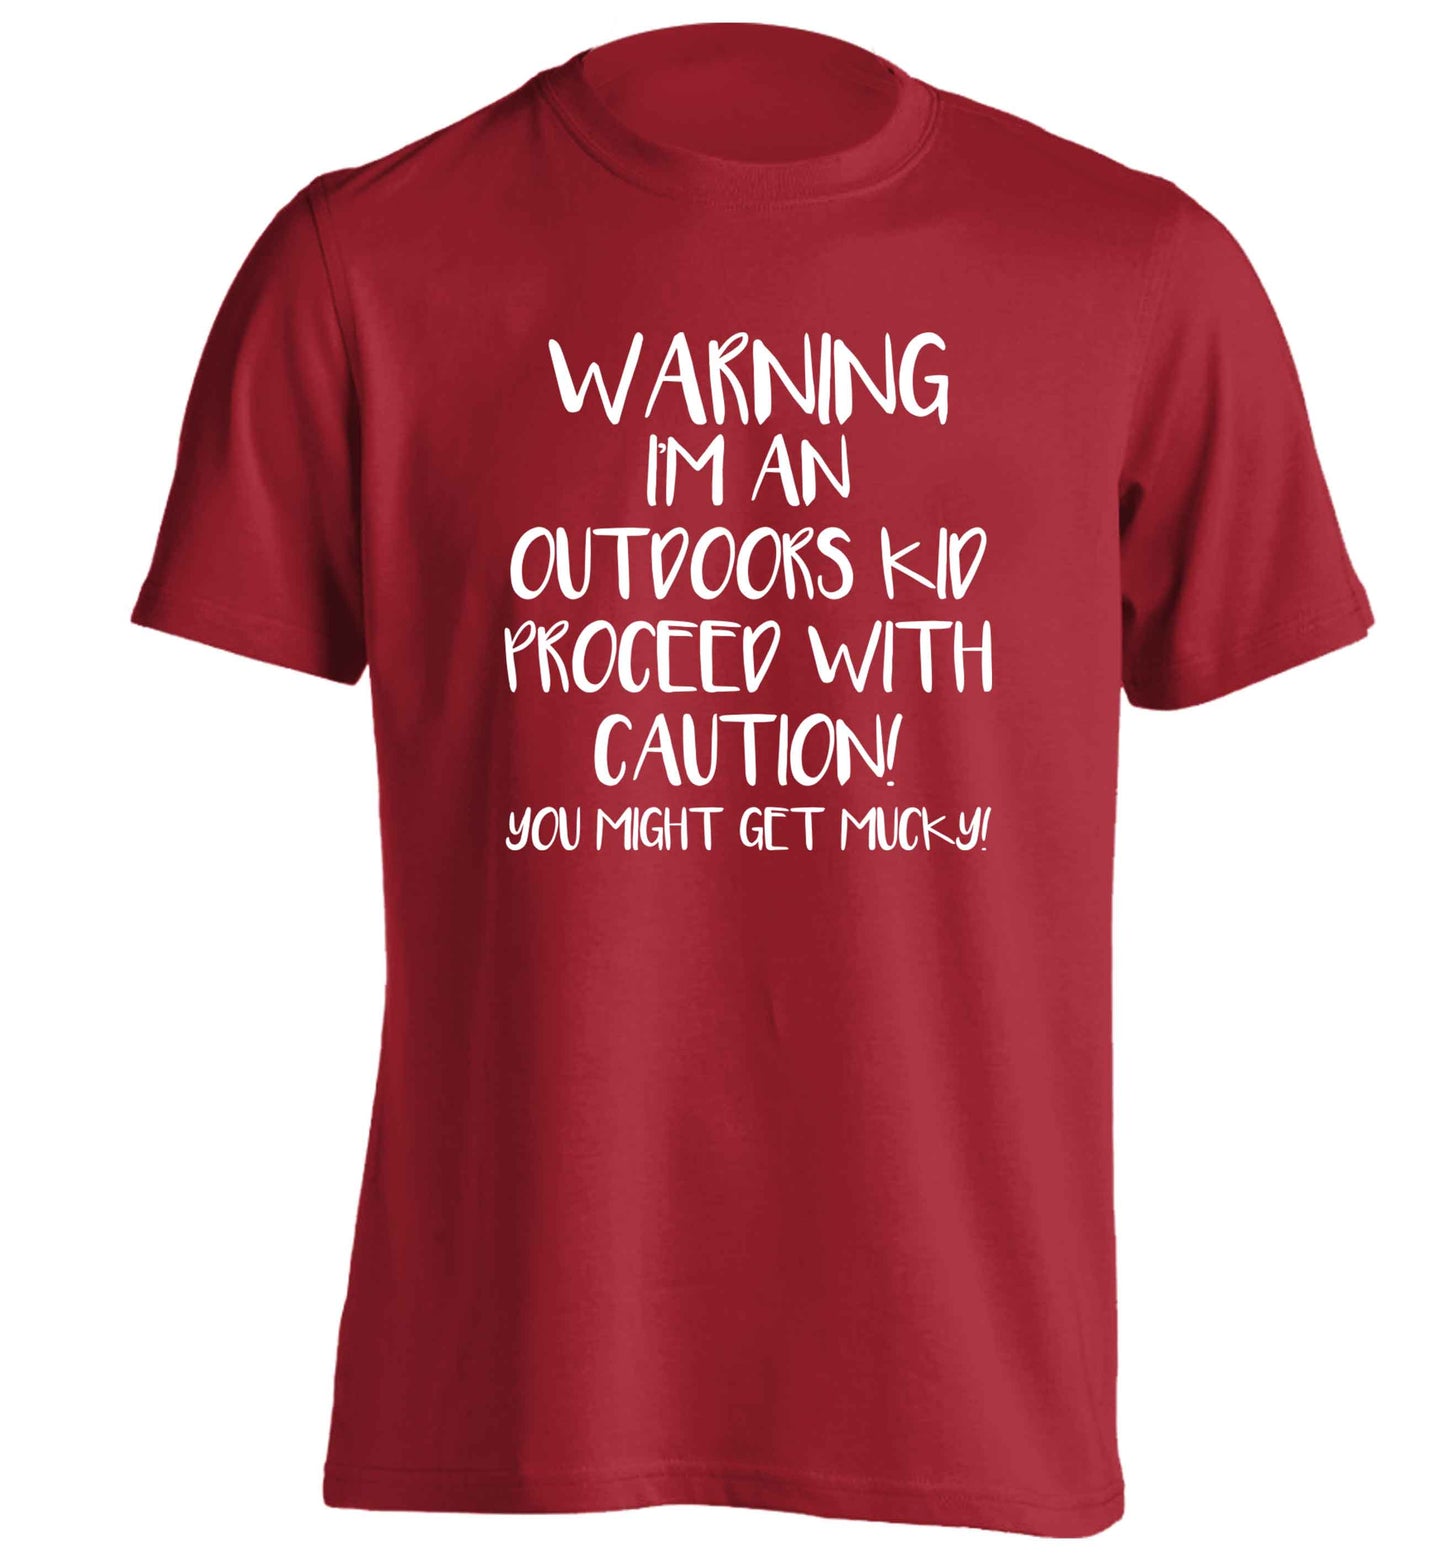 Warning I'm an outdoors kid! Proceed with caution you might get mucky adults unisex red Tshirt 2XL